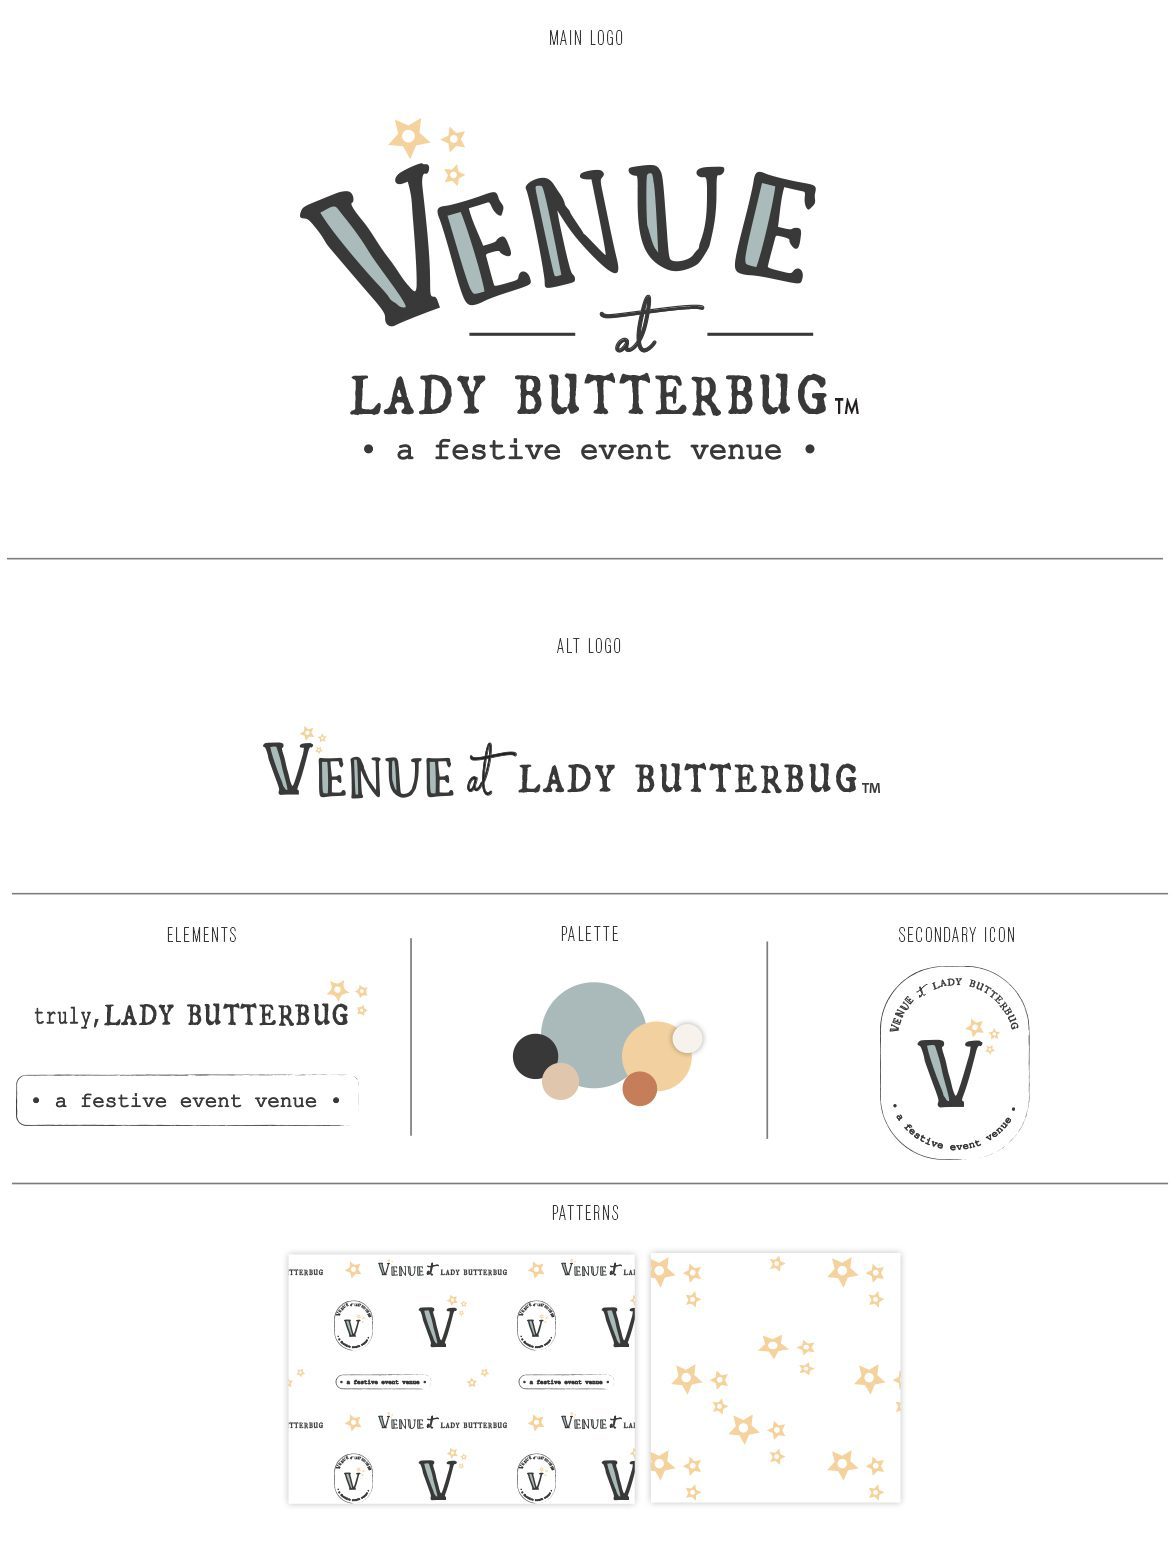 The Venue At Ladybutterbug | Bliss and Tell Creative BRAND | WEBSITE DESIGN